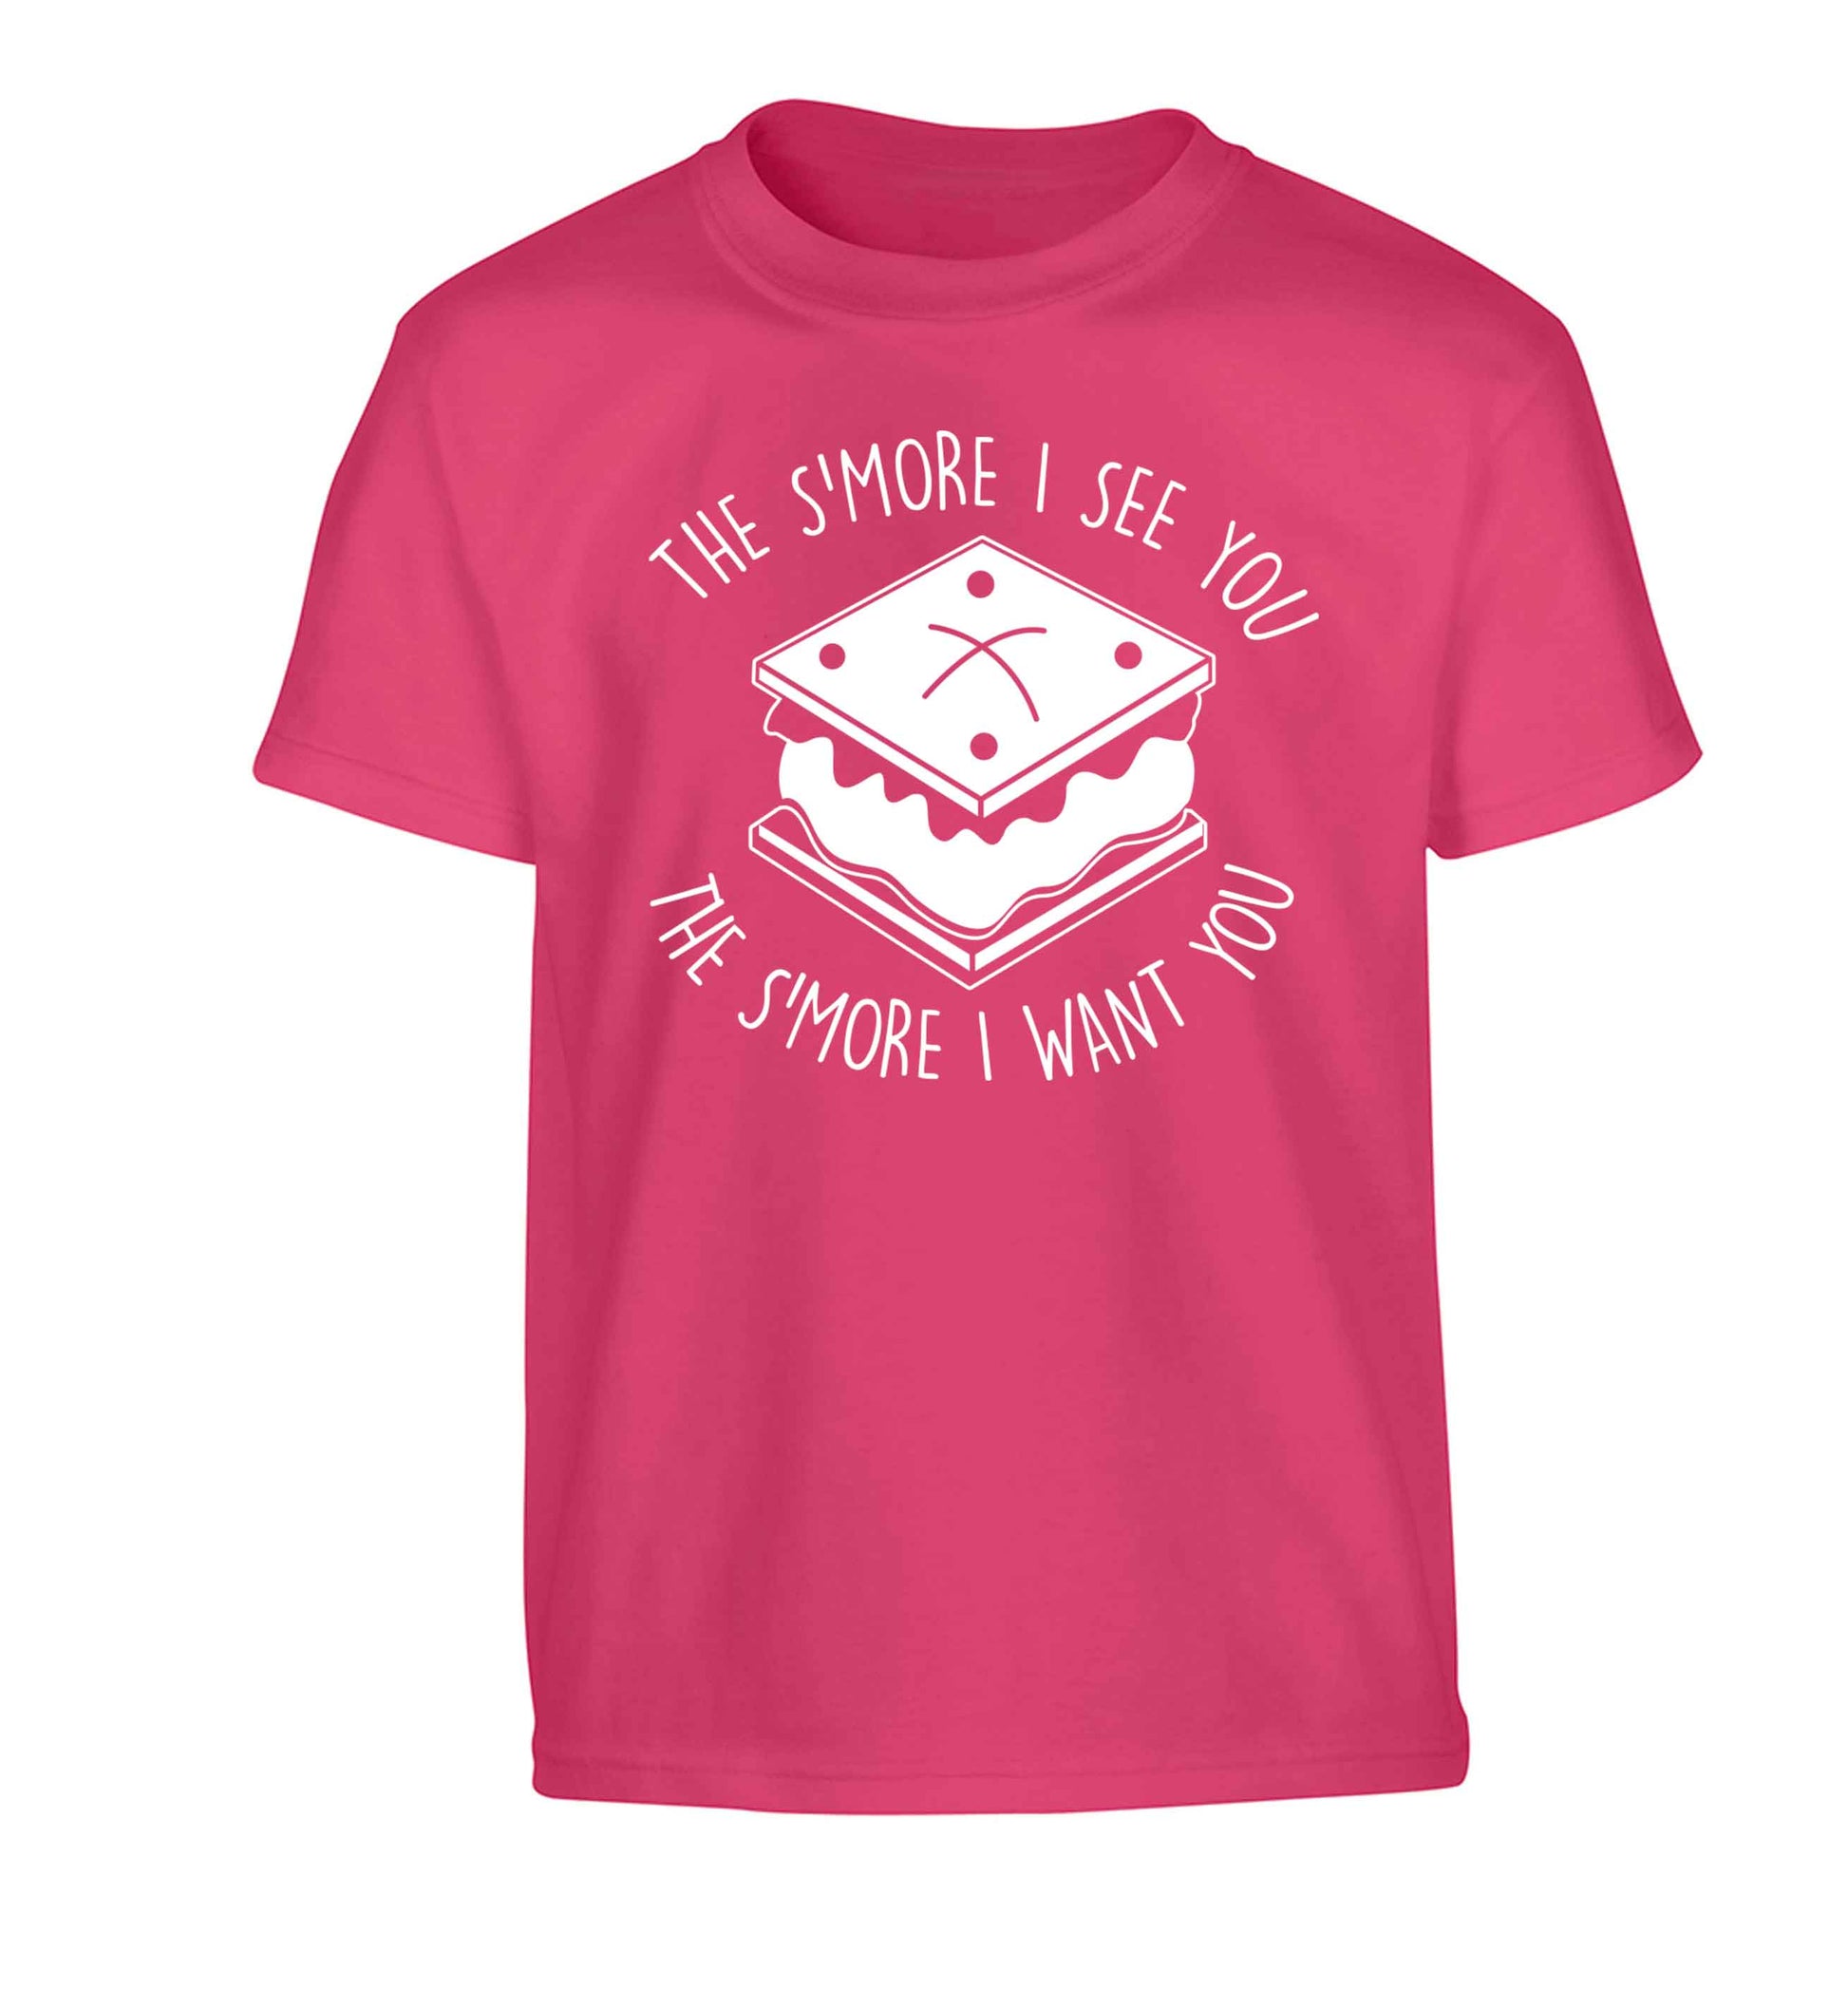 The s'more I see you the s'more I want you Children's pink Tshirt 12-13 Years